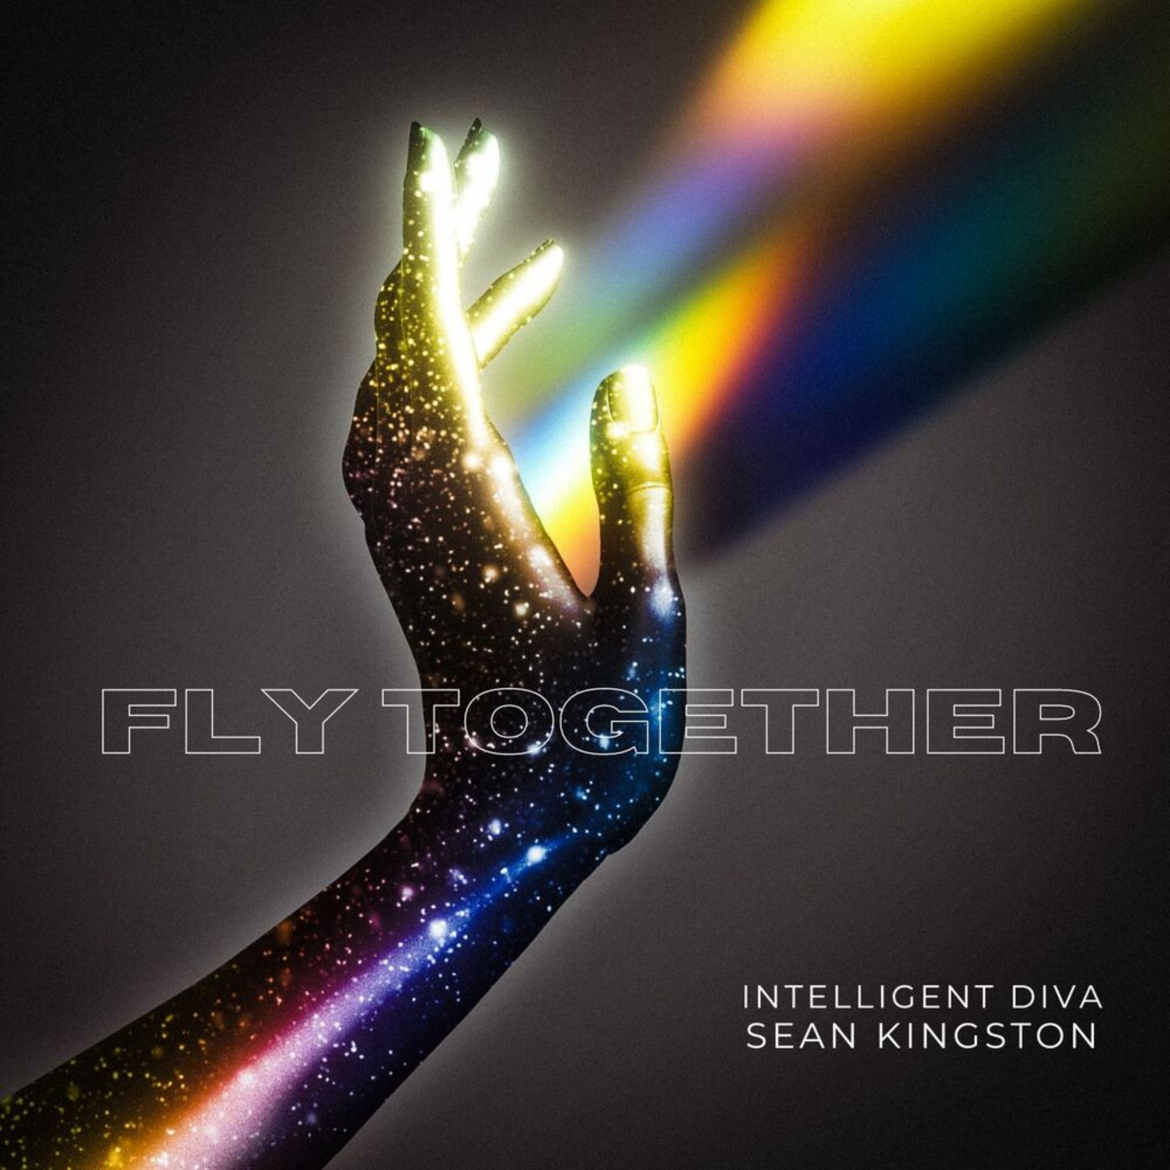 The new single ‘Fly Together’ from ‘Intelligent Diva’ Feat ‘Sean Kingston’ with its tropical dancehall meets Island vibes is on the playlist now.